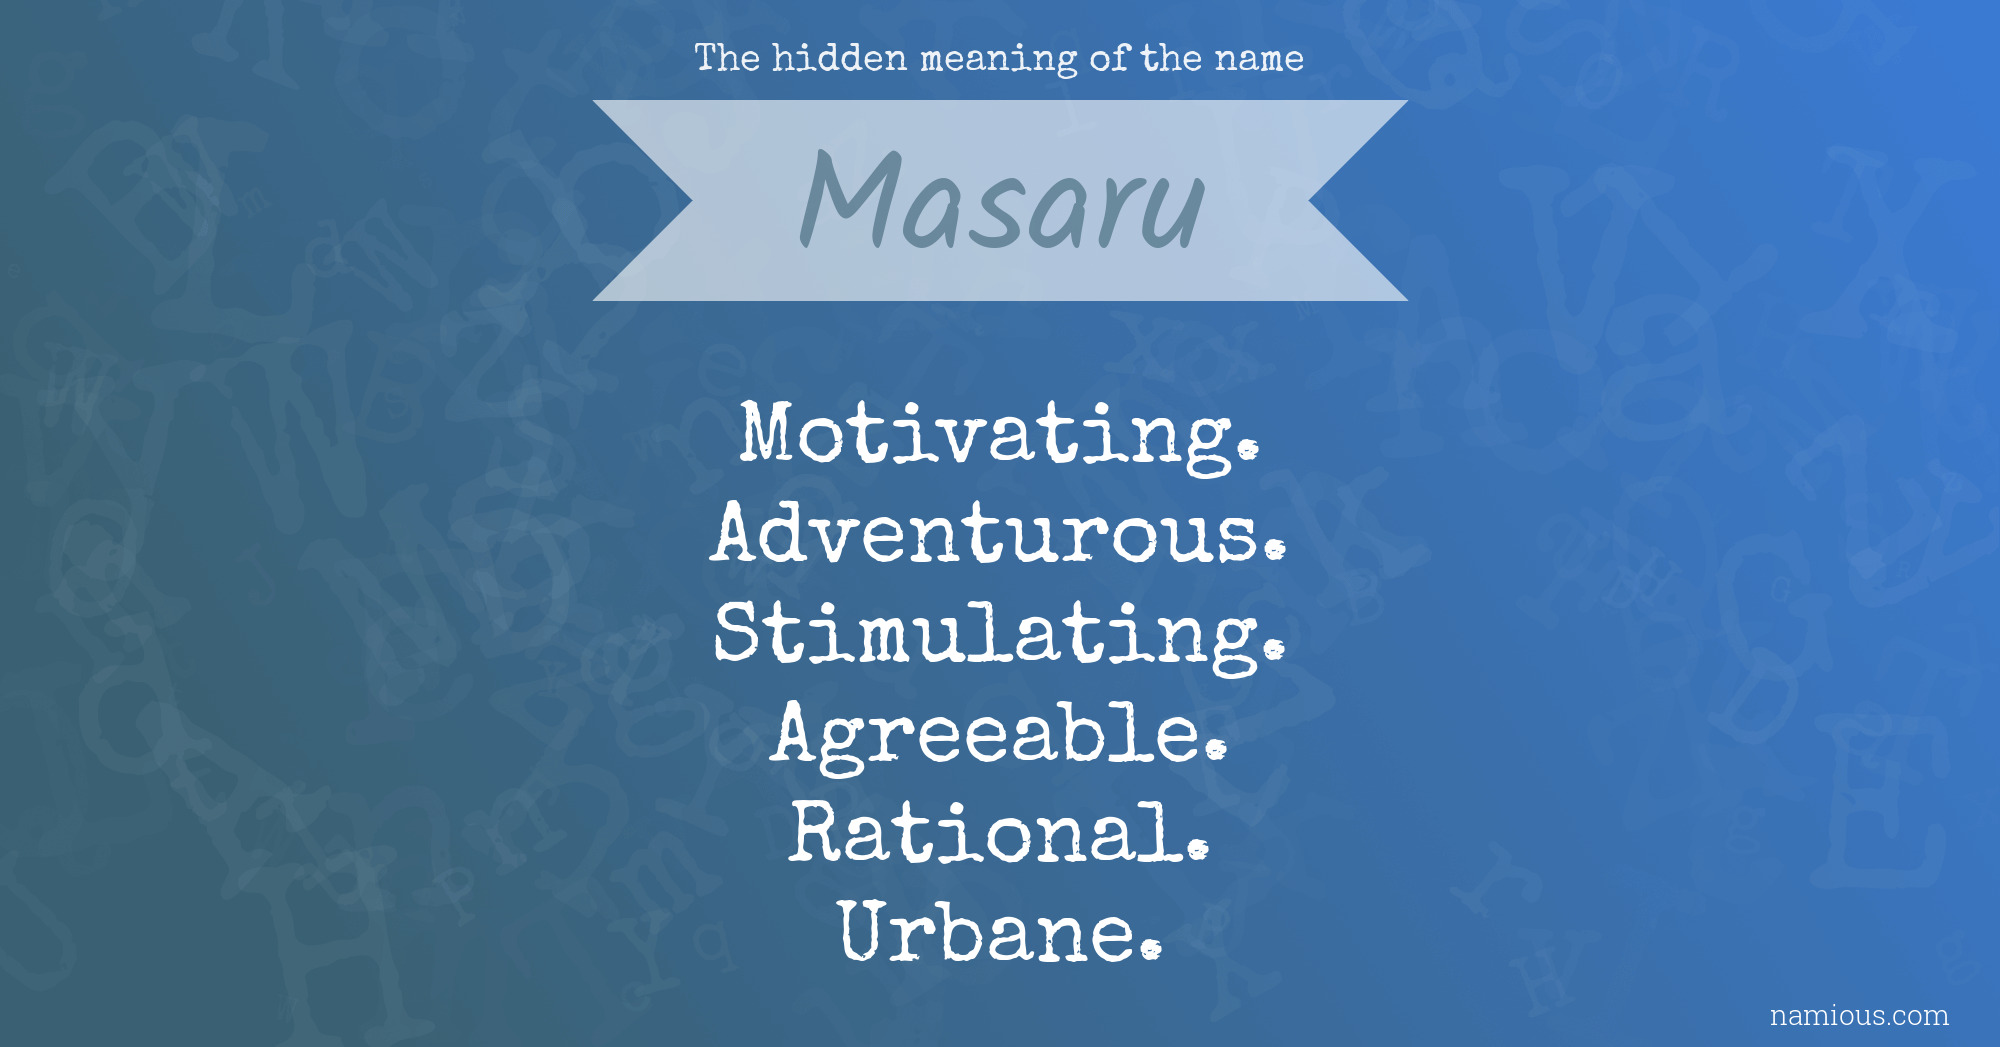 The hidden meaning of the name Masaru